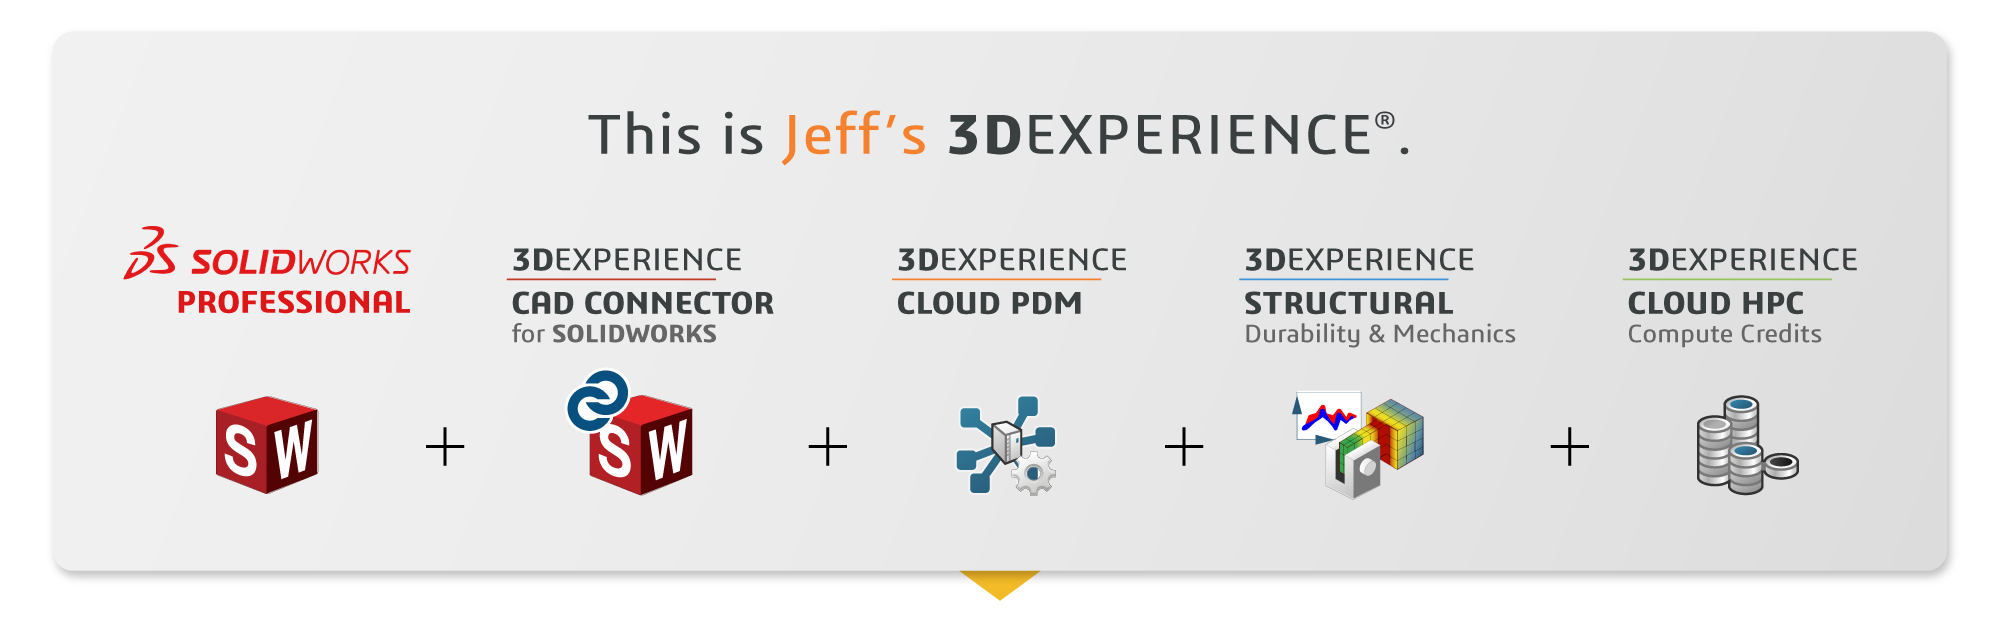 Jeff's Personal 3DEXPERIENCE Package adds cloud PDM, Abaqus-based FEA, and cloud HPC compute to his SOLIDWORKS Professional.